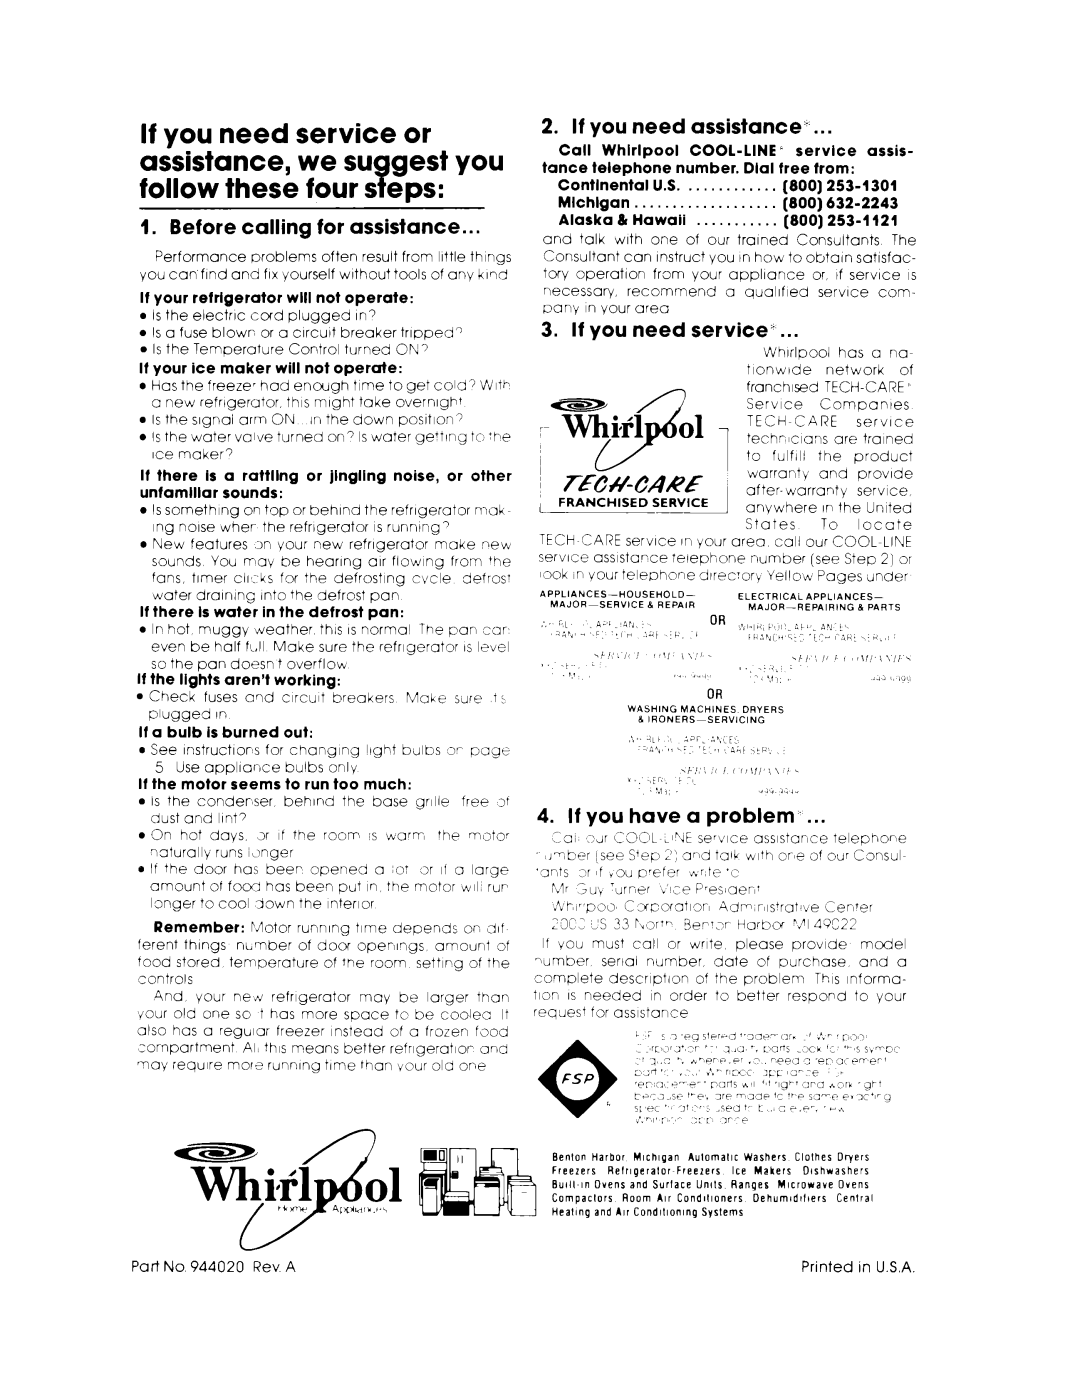 Whirlpool EB19AKXL warranty ~ 7EiC#CARE, Before calling for assistance, If you need assistance’, If you need service’ 